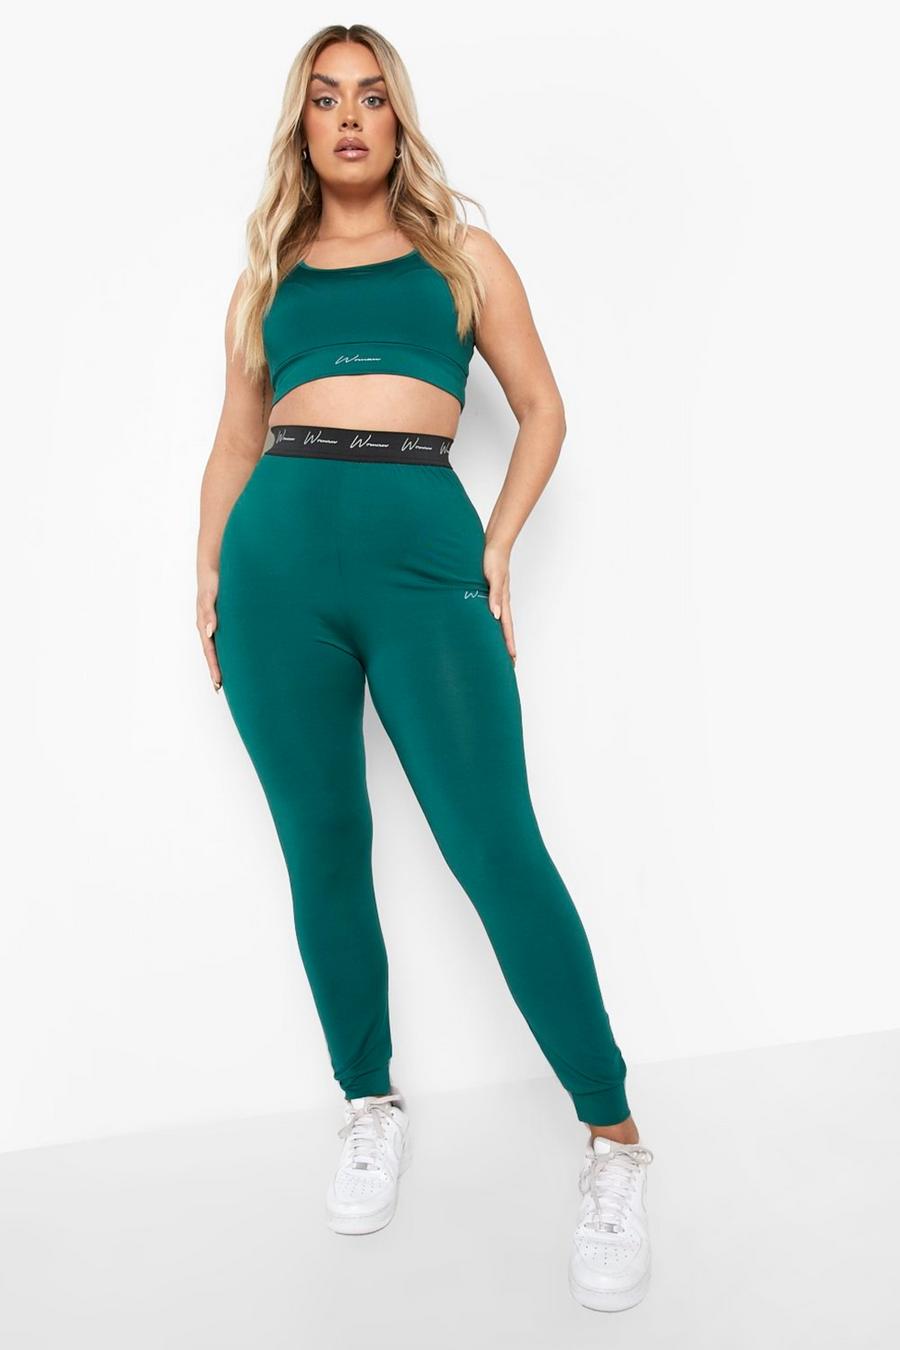 Plus Woman Active Kompressions-Leggings, Forest green